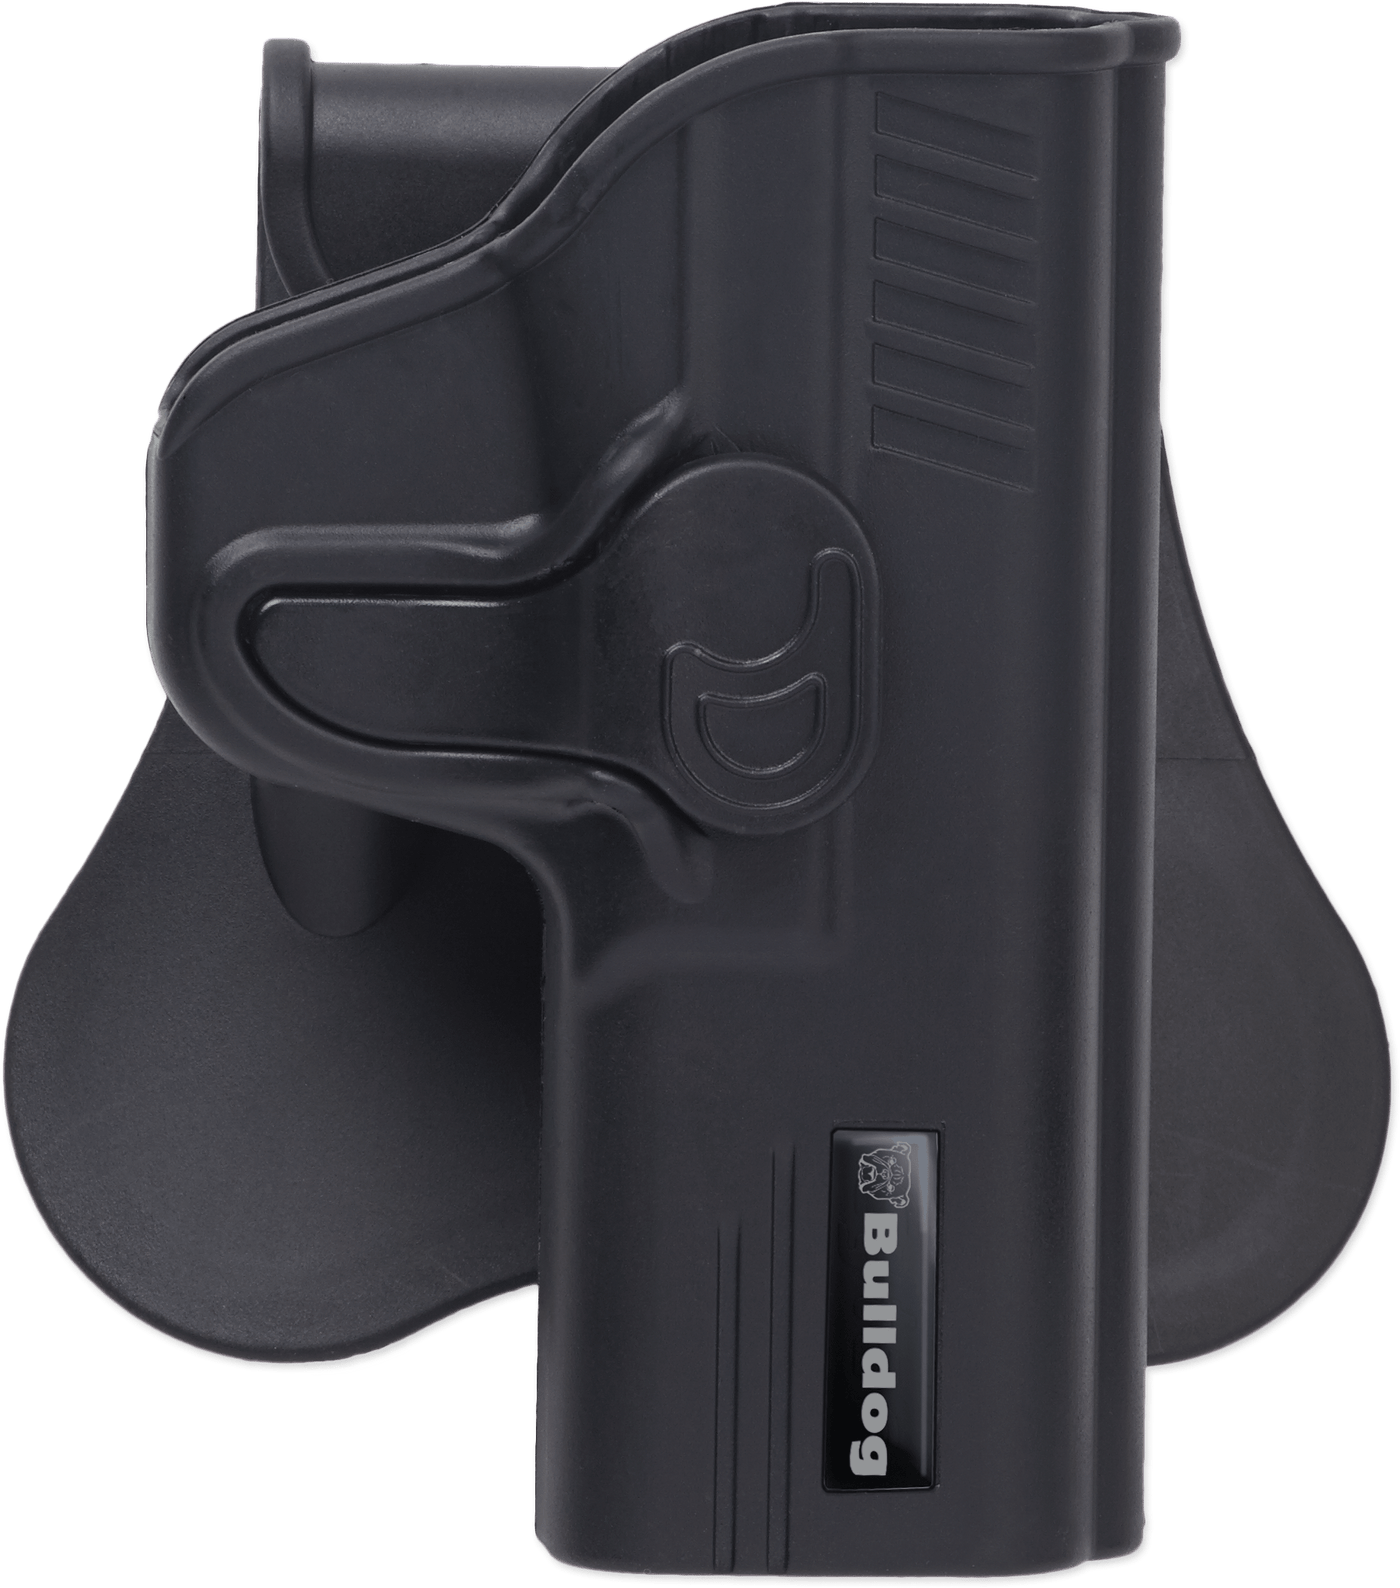 Bulldog Bulldog Rr Holster Paddle Poly - Ruger Lcp&keltec P-3at Blk Rh Holsters And Related Items